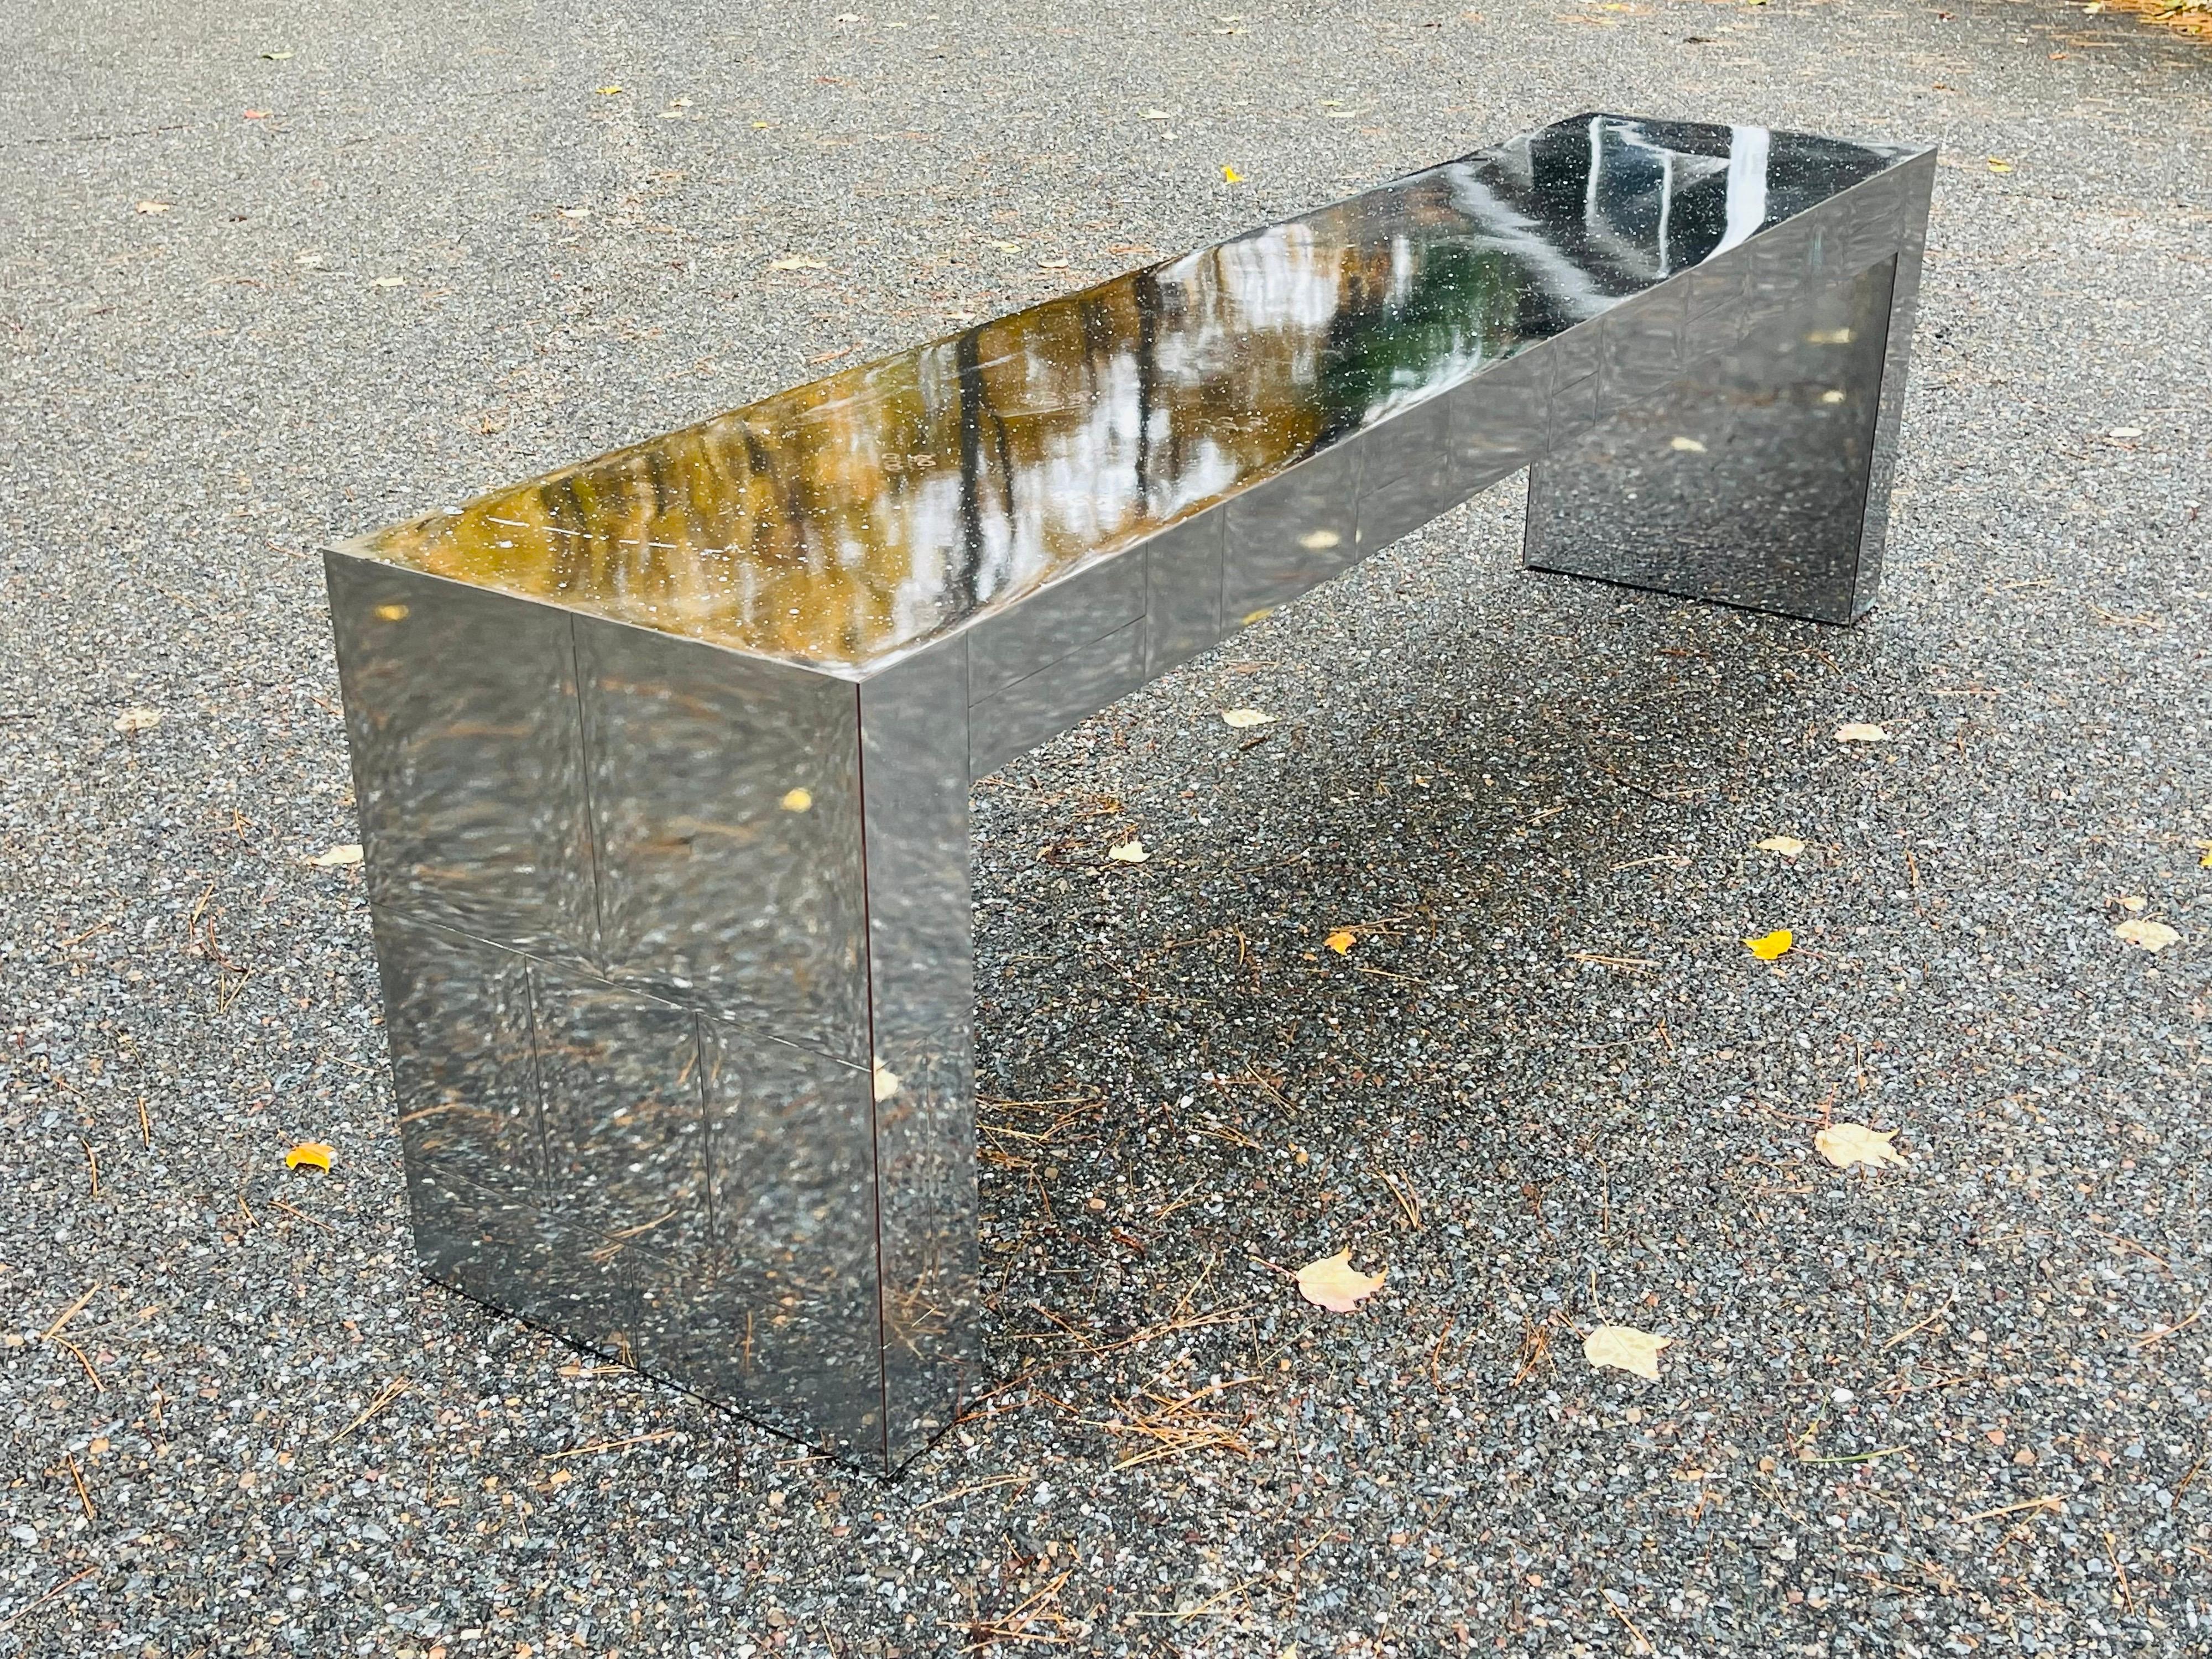 Wonderful long mirrored console table in style of Paul Evans Cityscape makes a unique display shelf in a variety of interiors. Cityscape design makes this patchwork mirrored shelf perfect for storage, display, or accent in foyer, hall, or showroom.